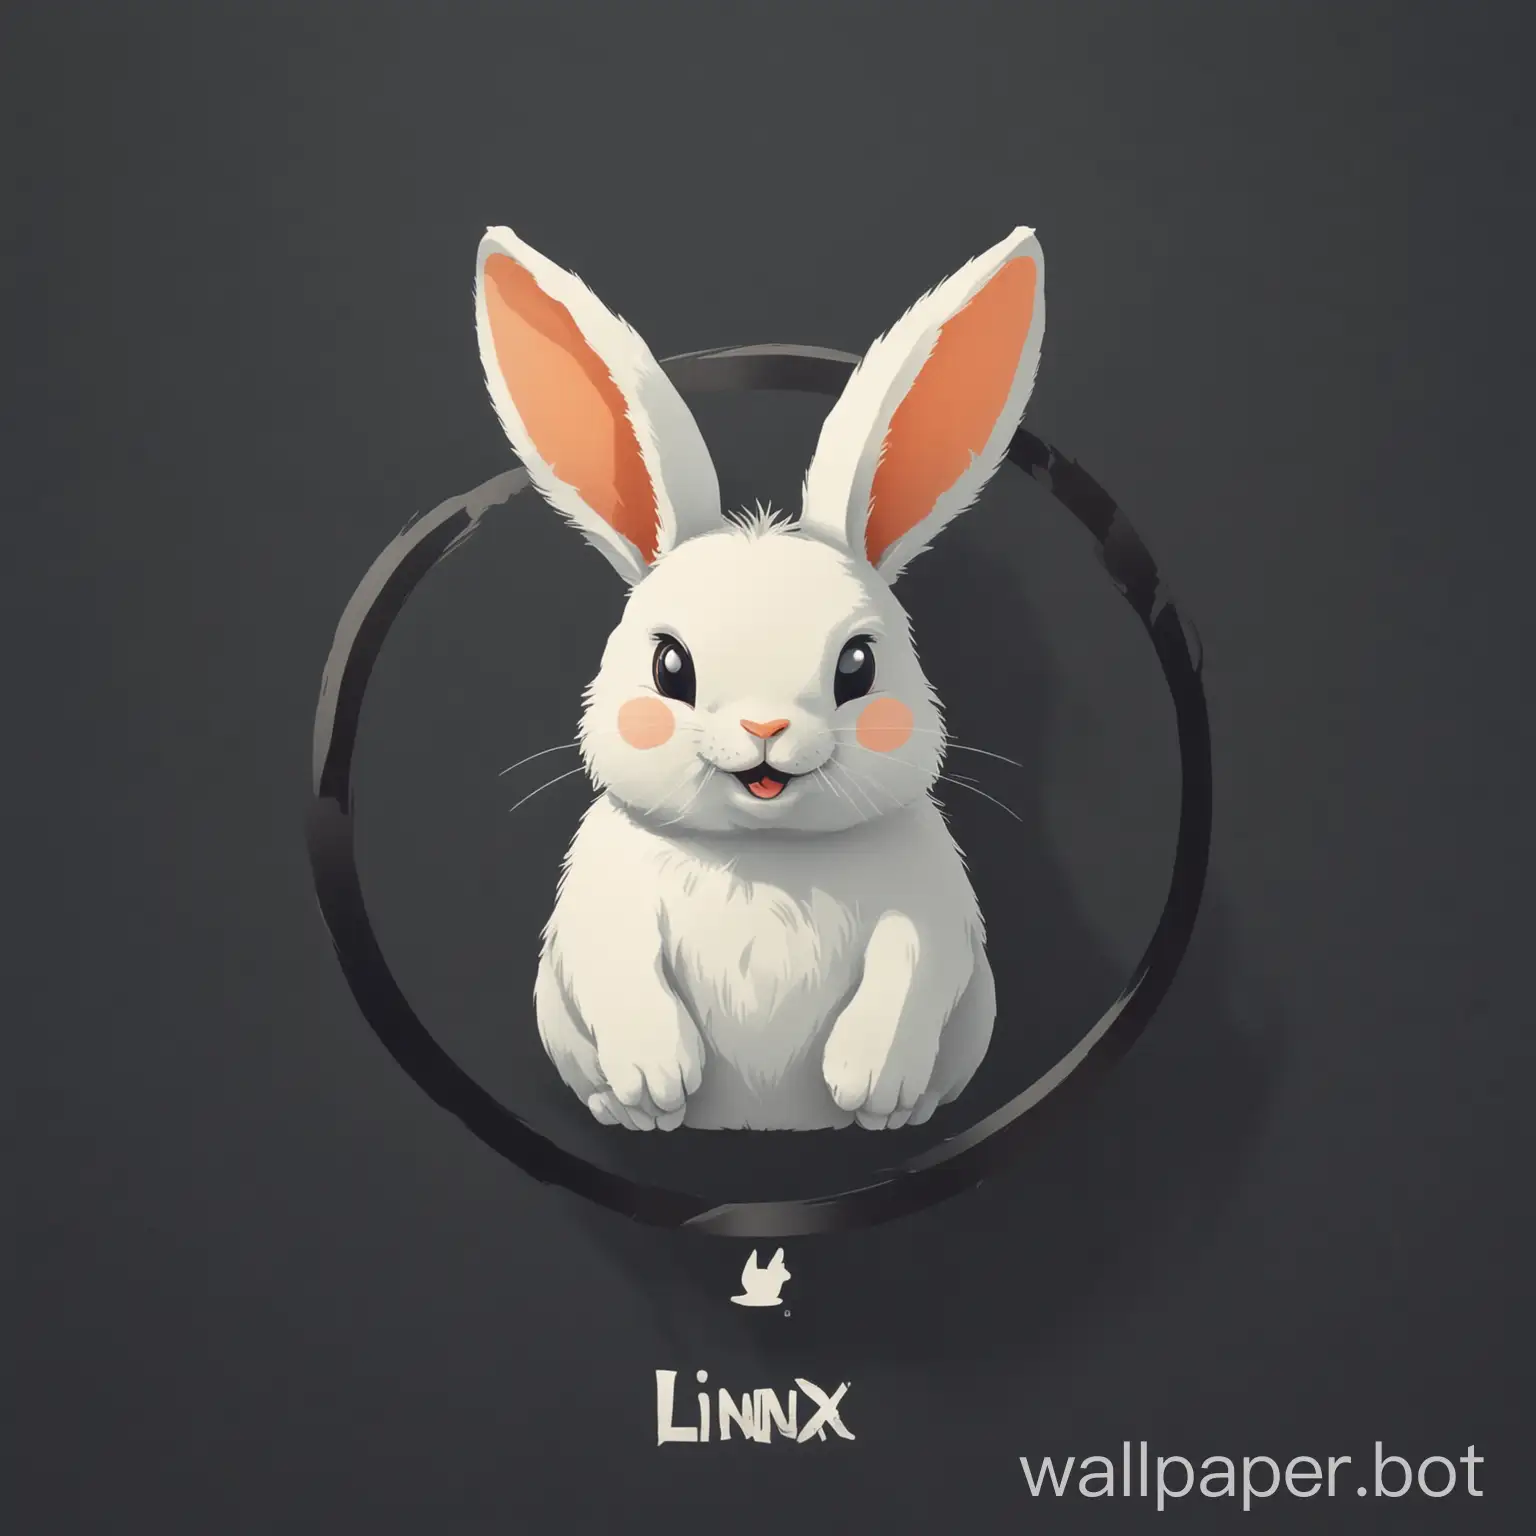 a rabbit logo for a linux distro, without text